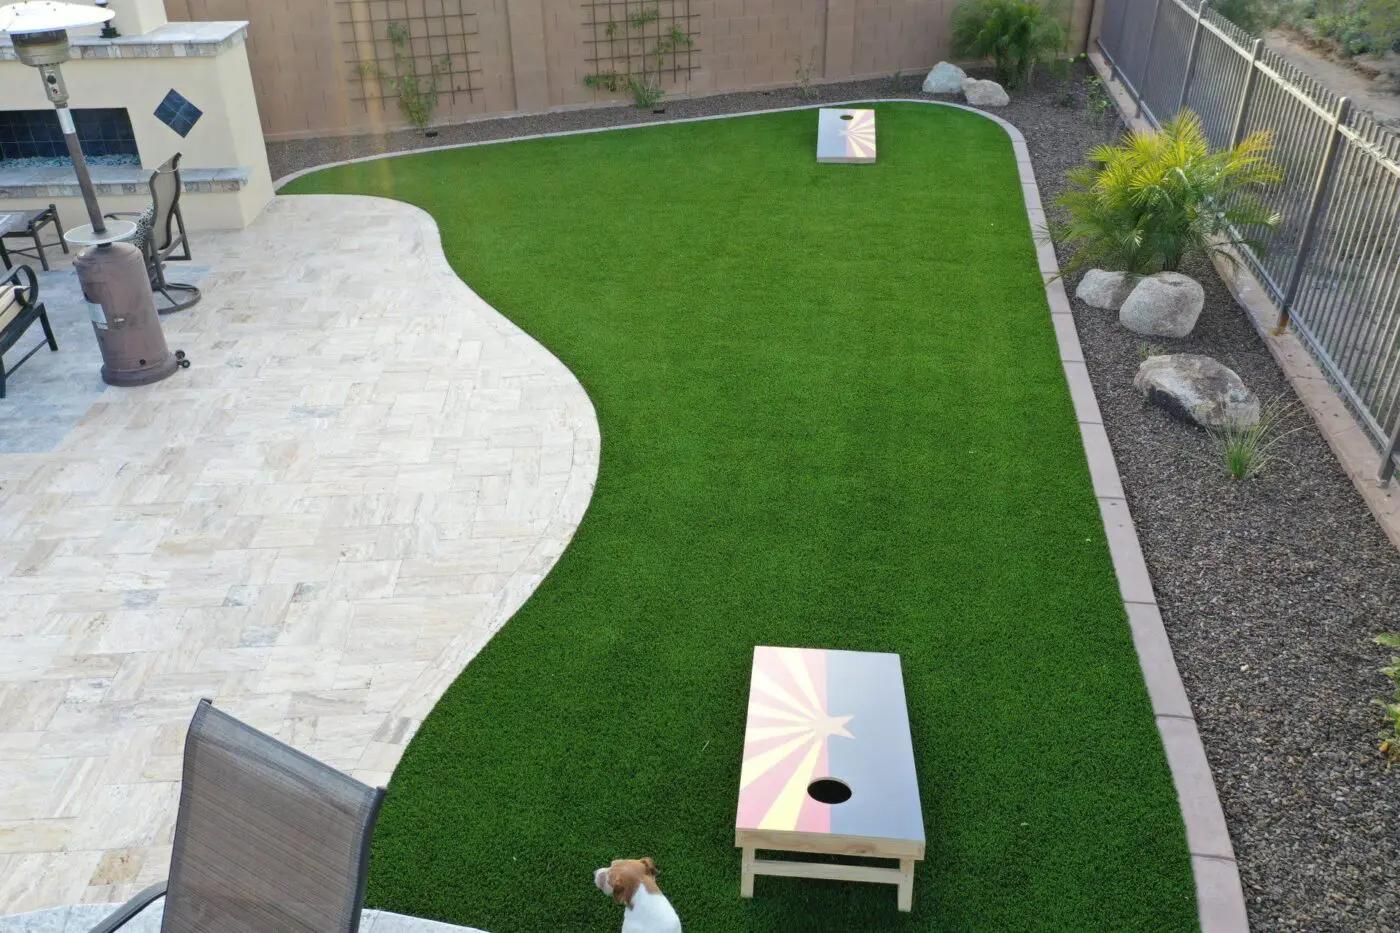 A backyard by Landscape Pros features a neatly manicured artificial grass lawn with two cornhole boards set up. There's a tiled patio with a chair and a dog in the lower left corner. The East Valley yard is bordered by a stone wall and metal fence, with decorative plants and rocks completing the serene setting.